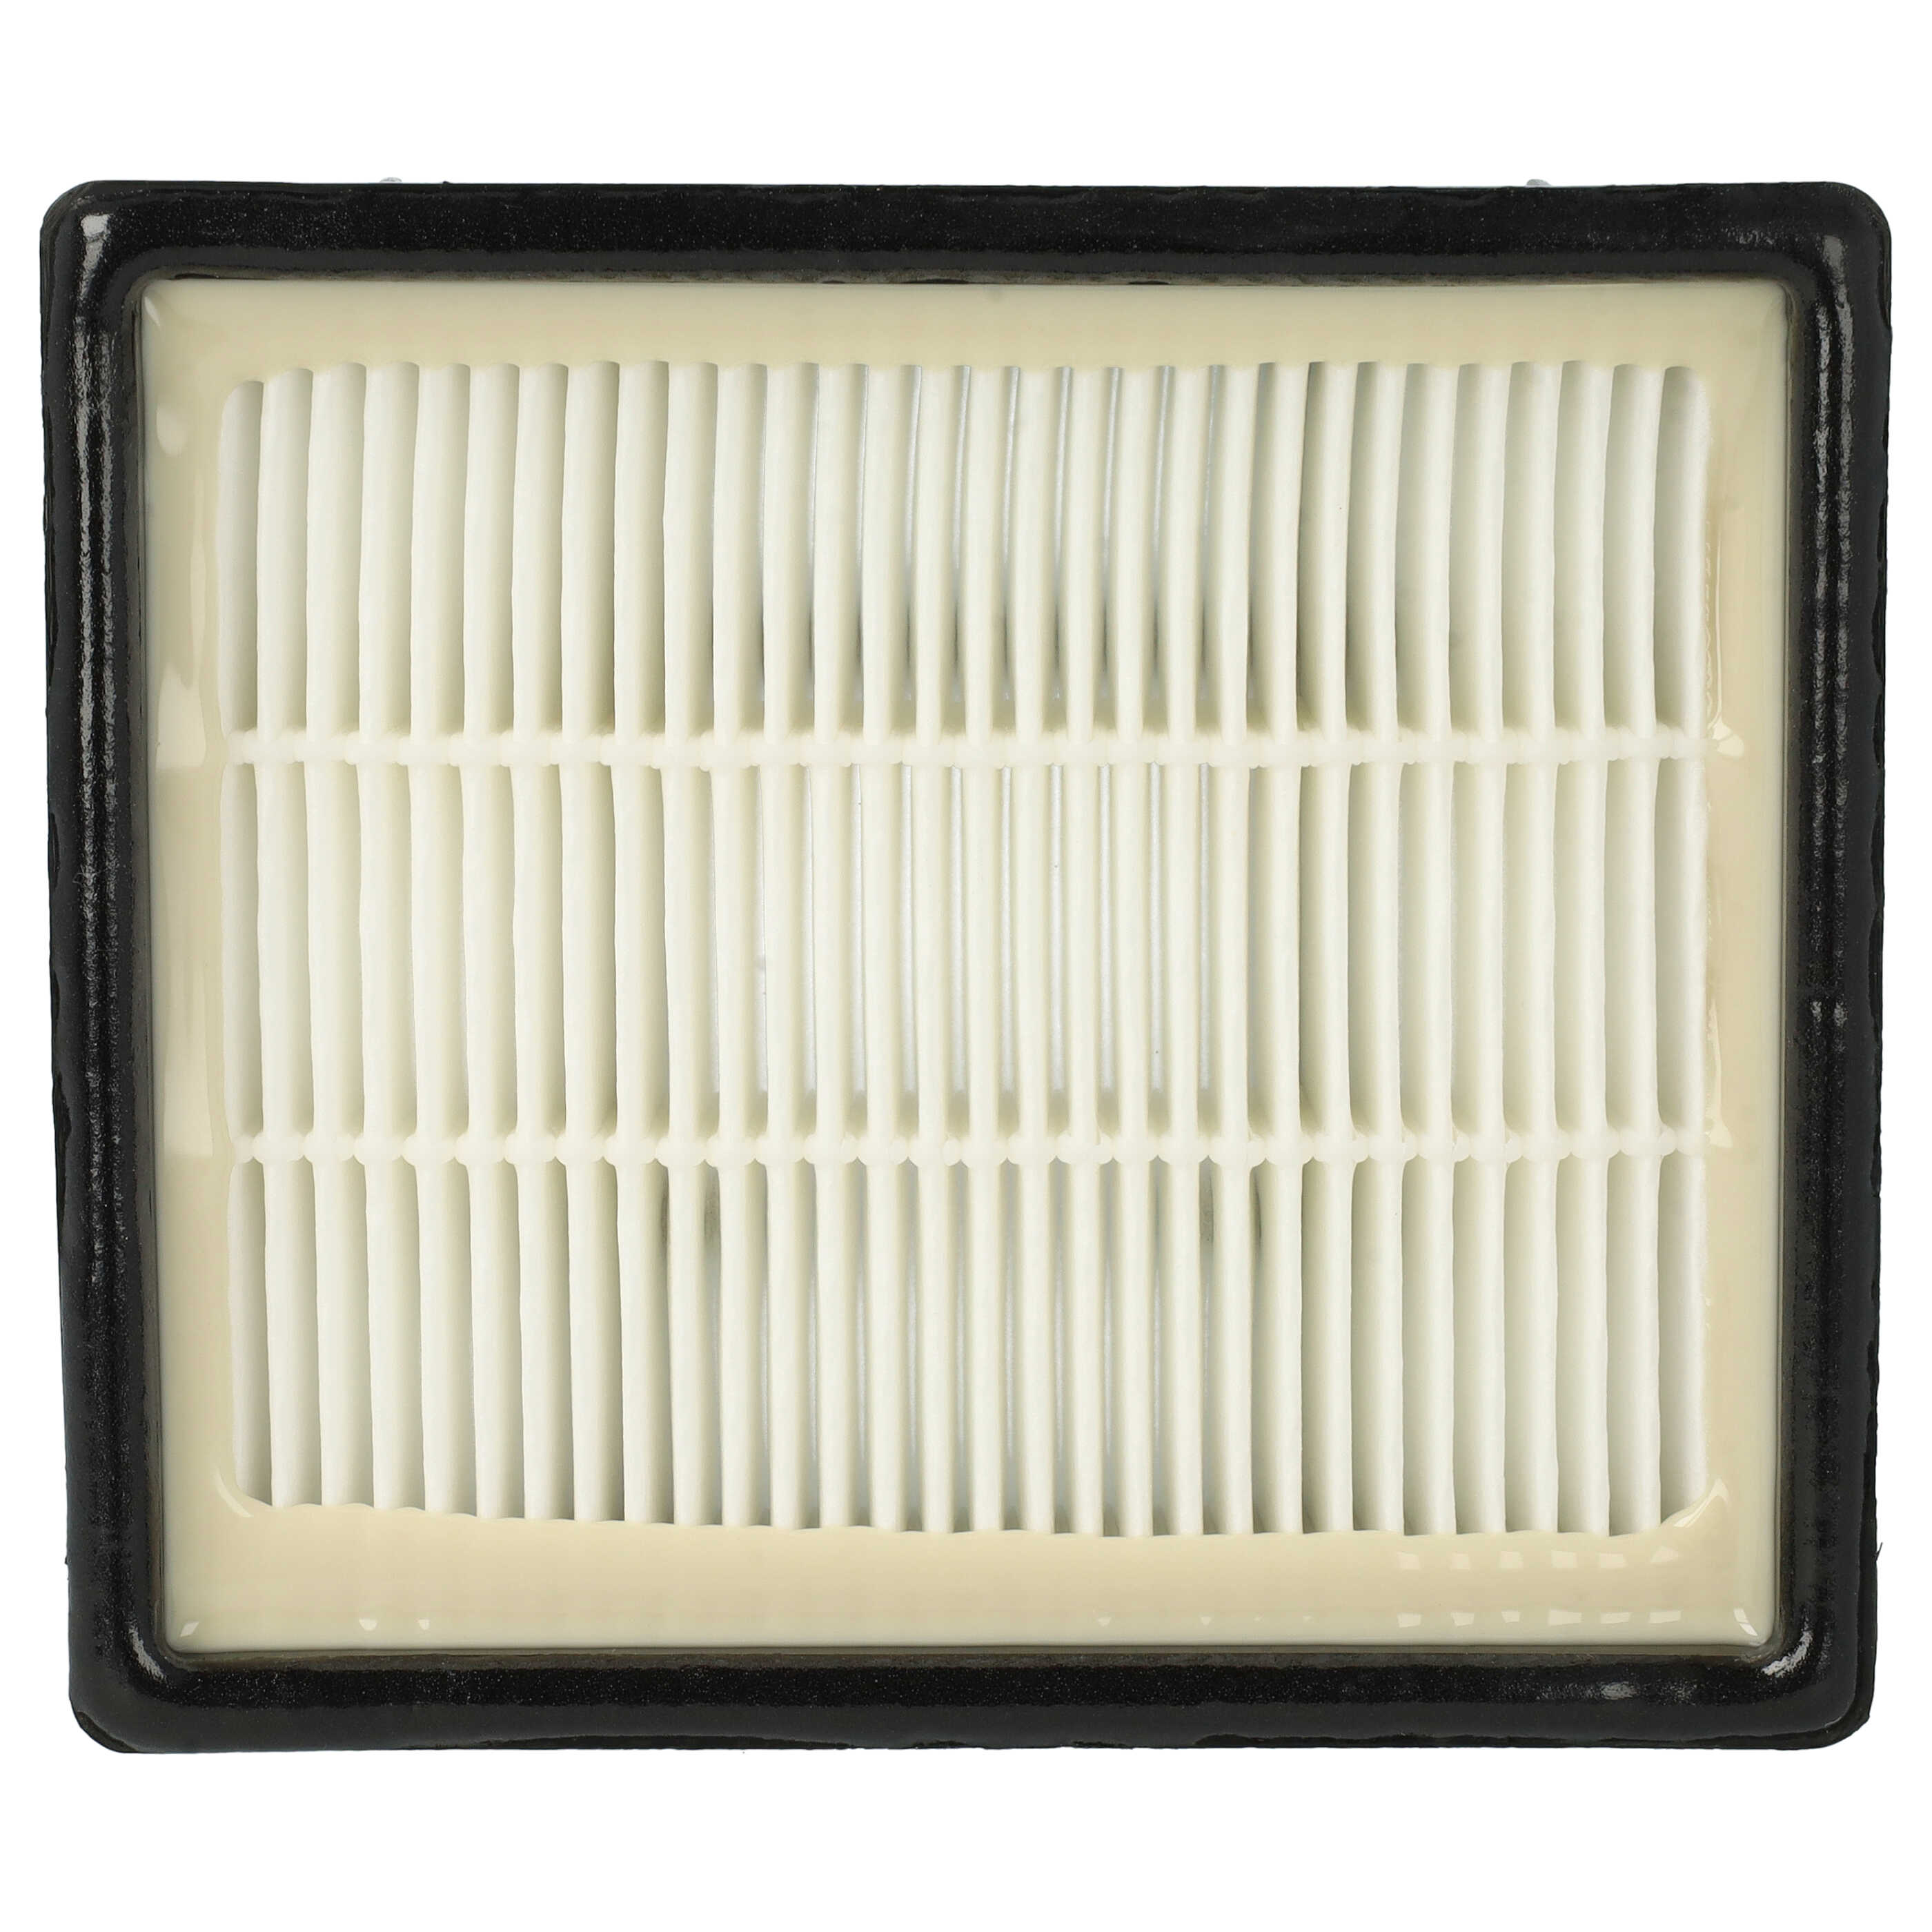 1x HEPA filter replaces AEG/Electrolux 4055116125, 1924992207 for AEG Vacuum Cleaner, filter class H11